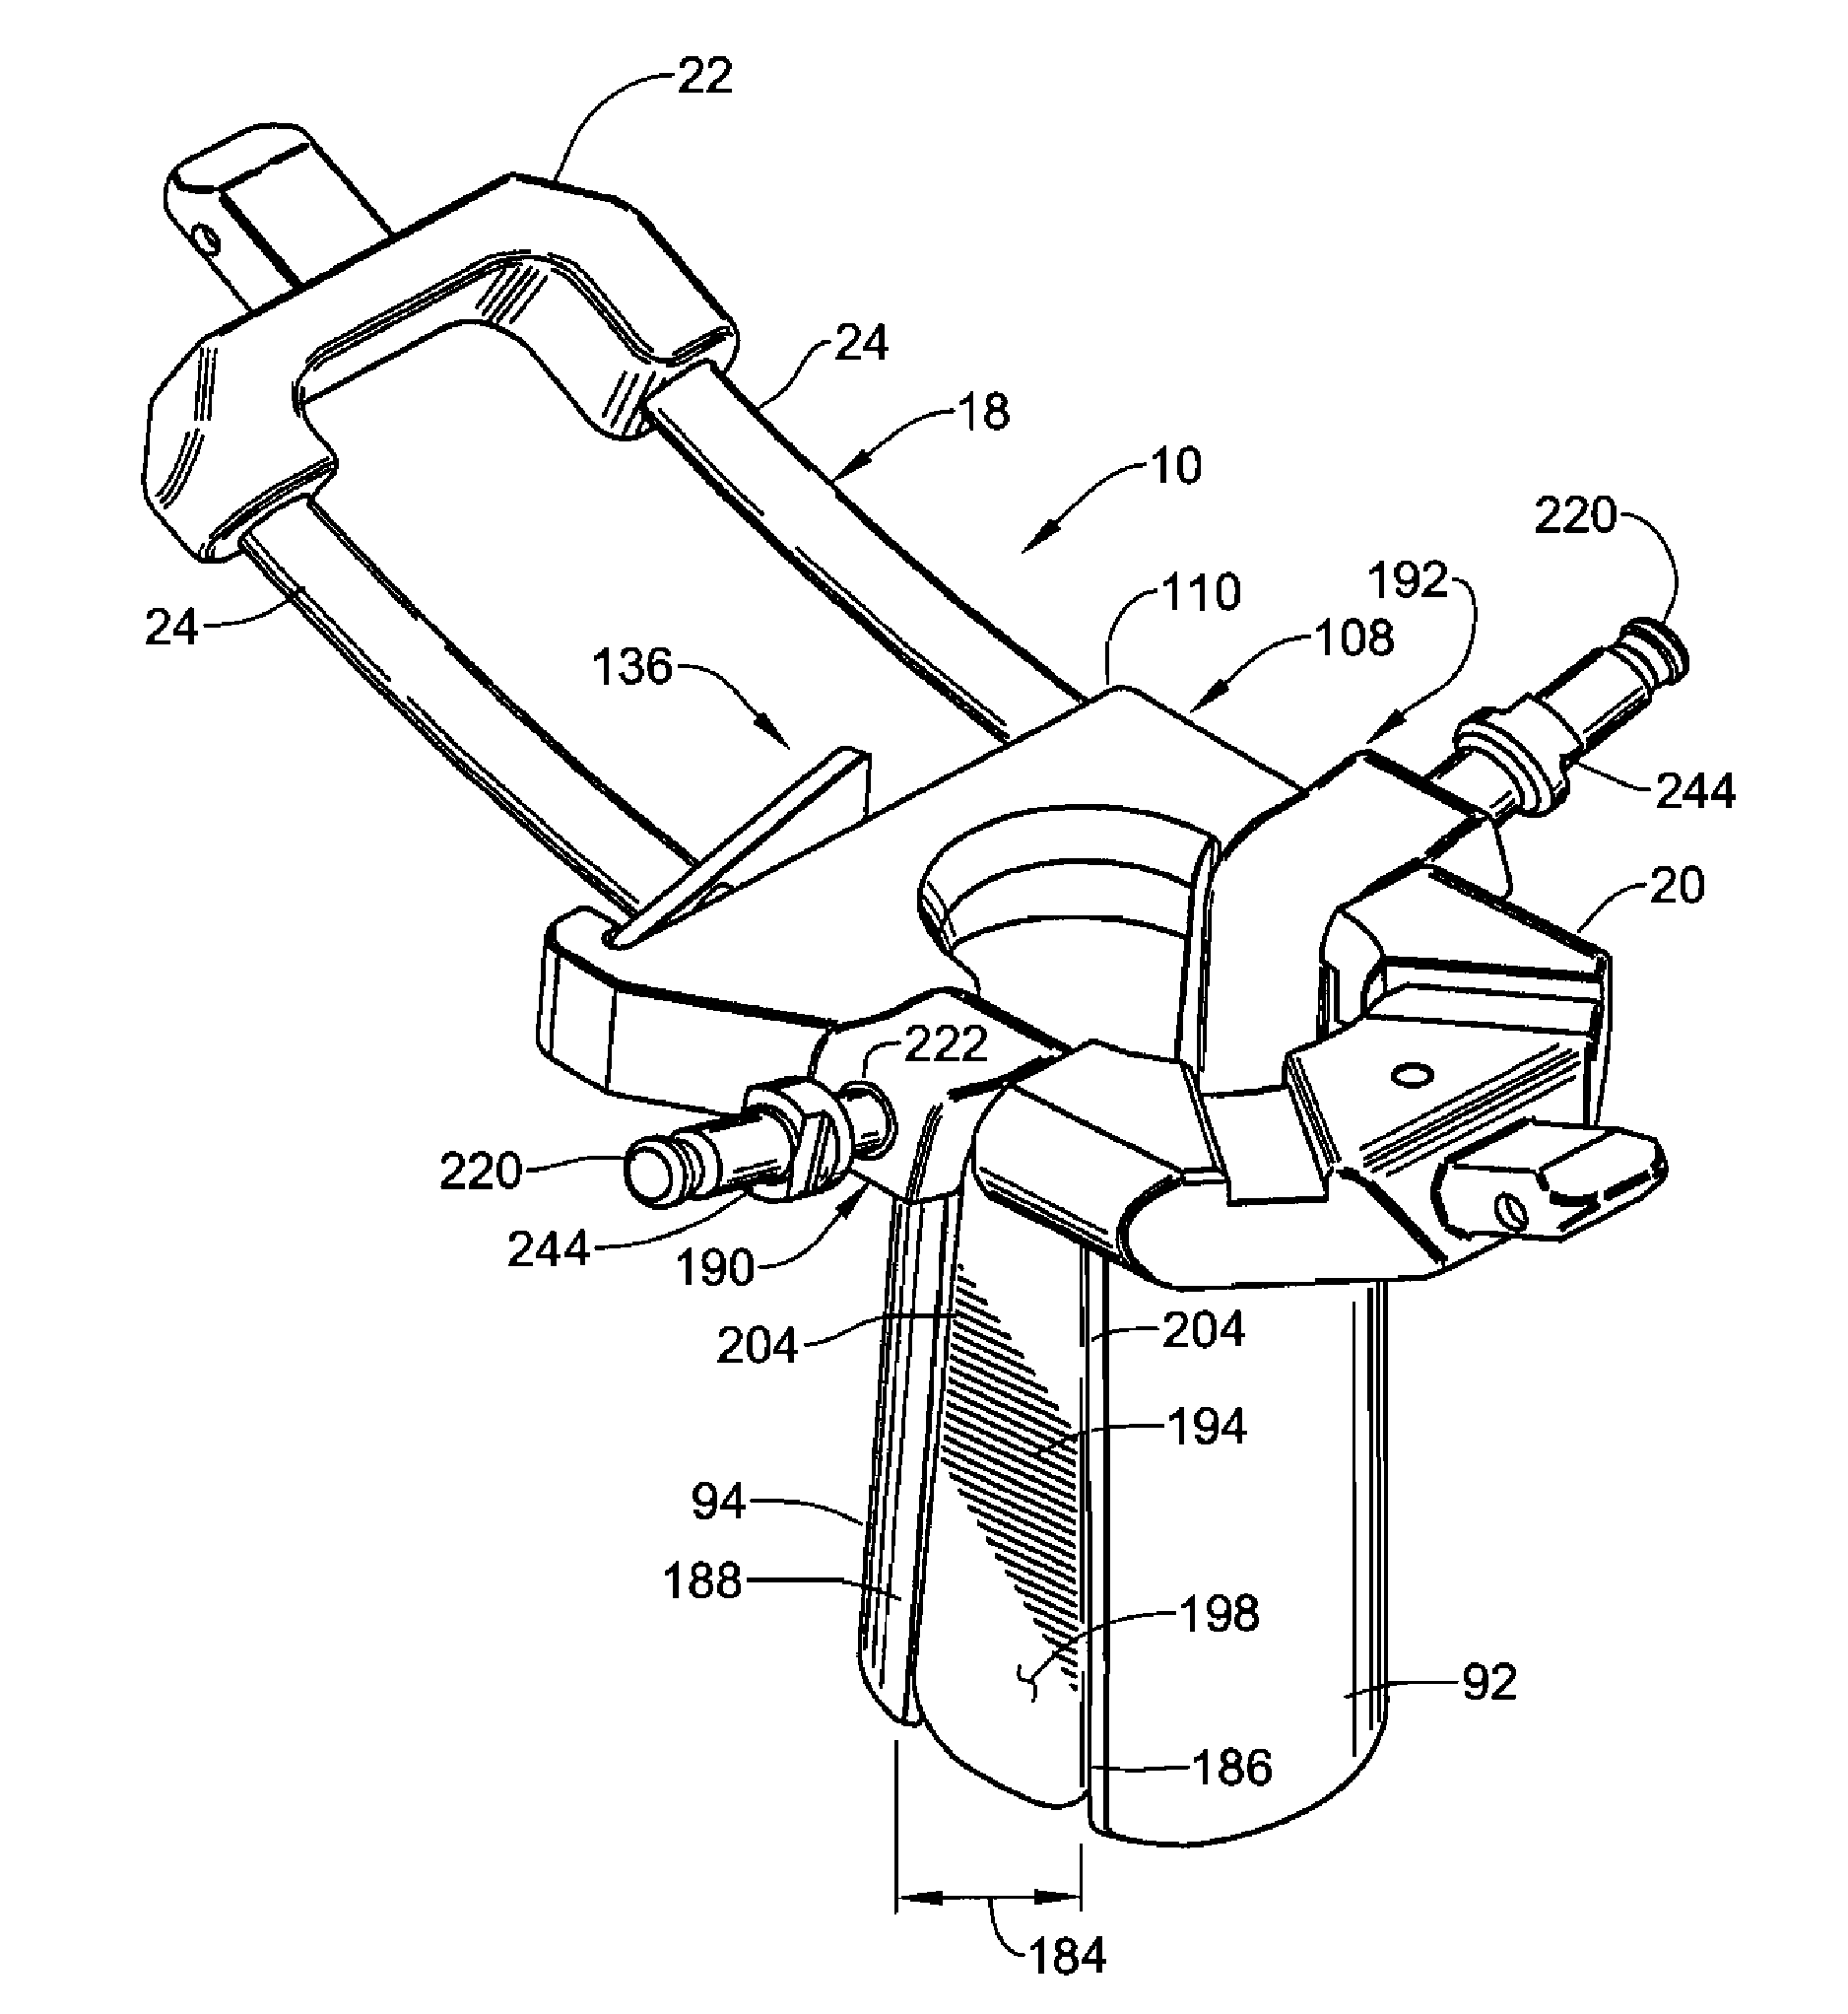 Surgical access system and method of using the same